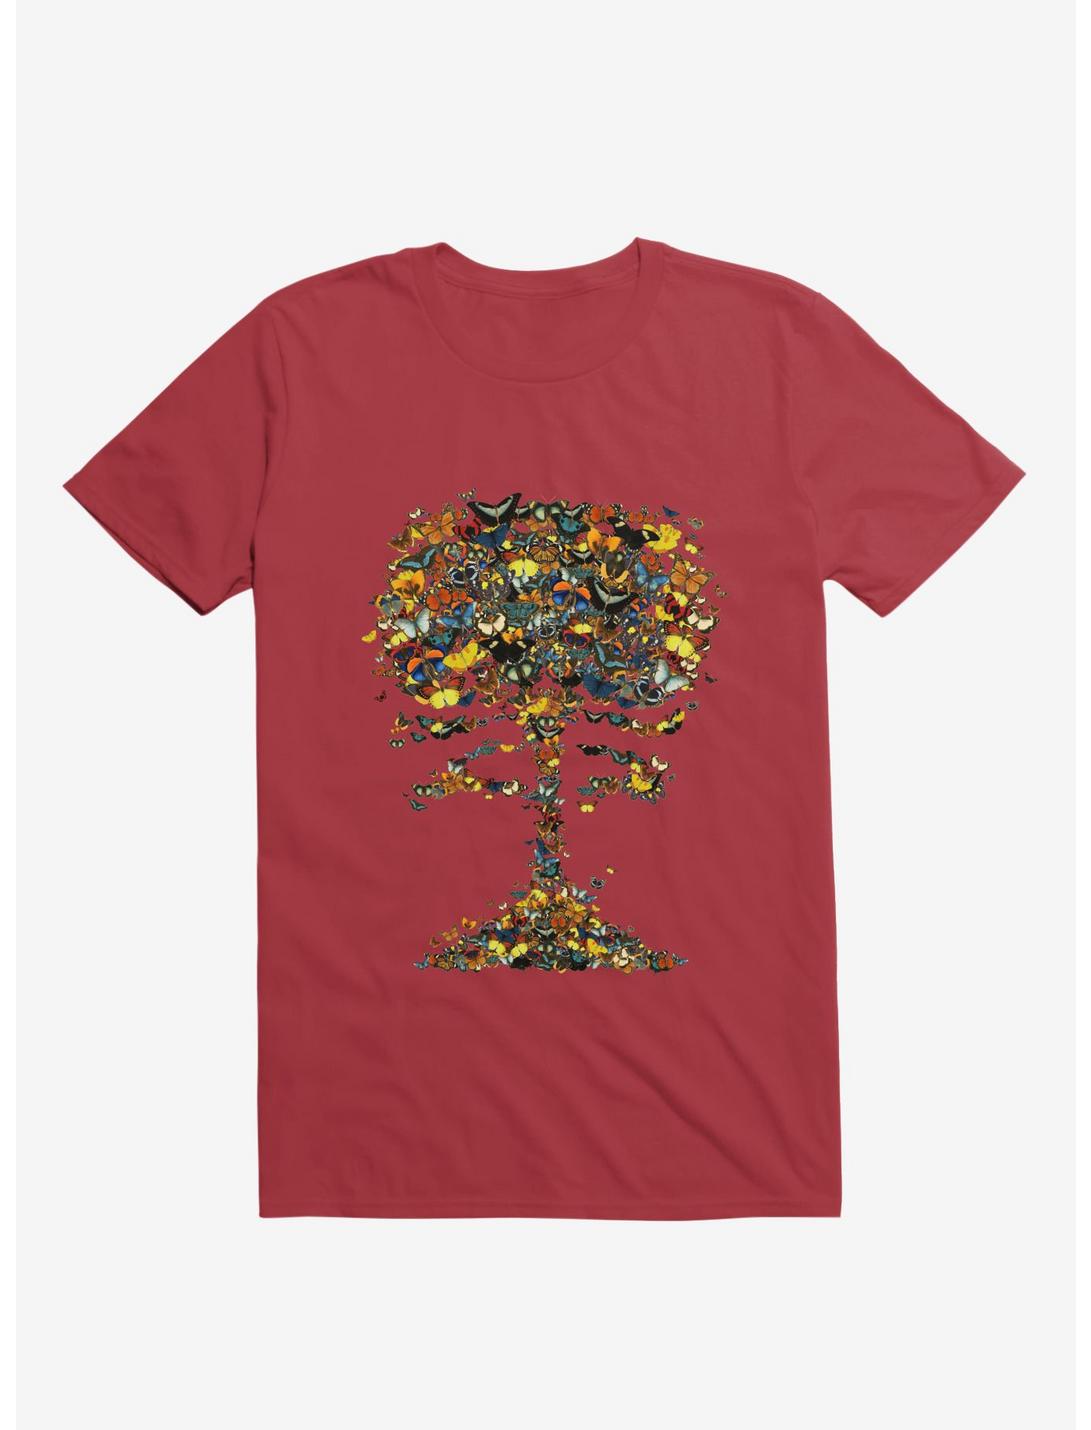 Atomic Butterfly T-Shirt, RED, hi-res